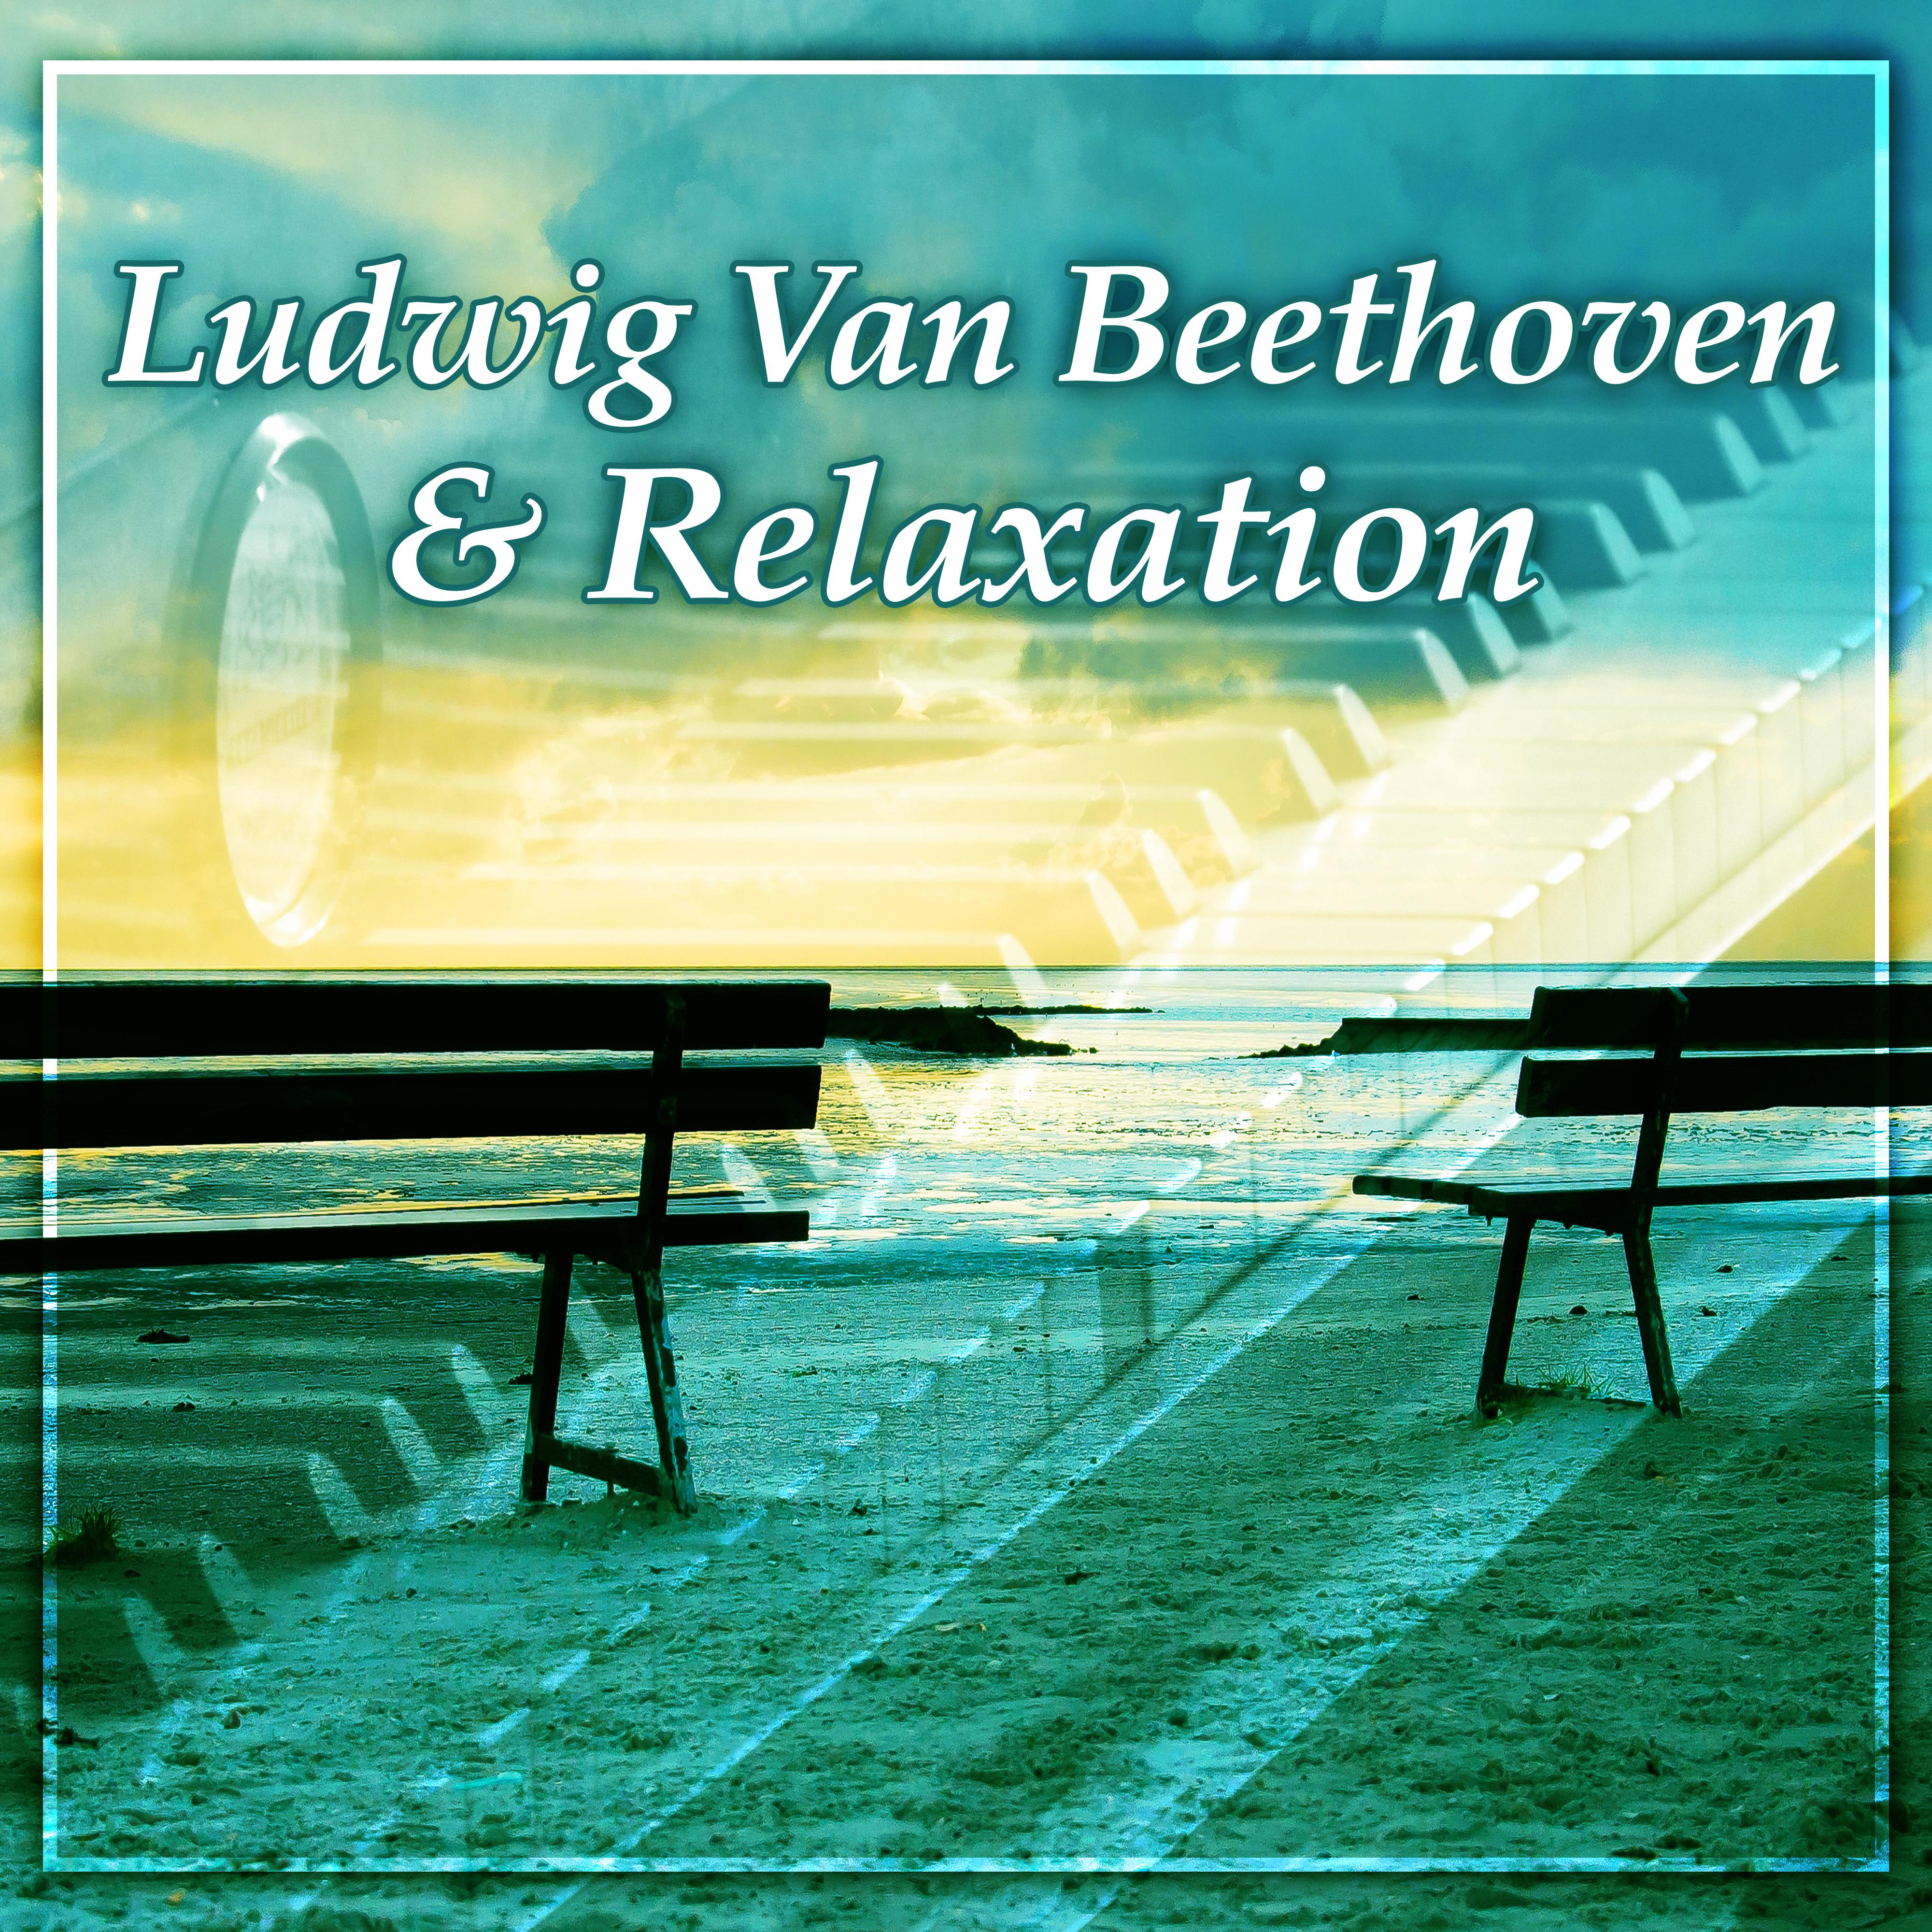 Ludwig Van Beethoven & Relaxation- Beethoven Songs, Classical Piano After Work, Music for Relaxation, Listening, Peaceful Day